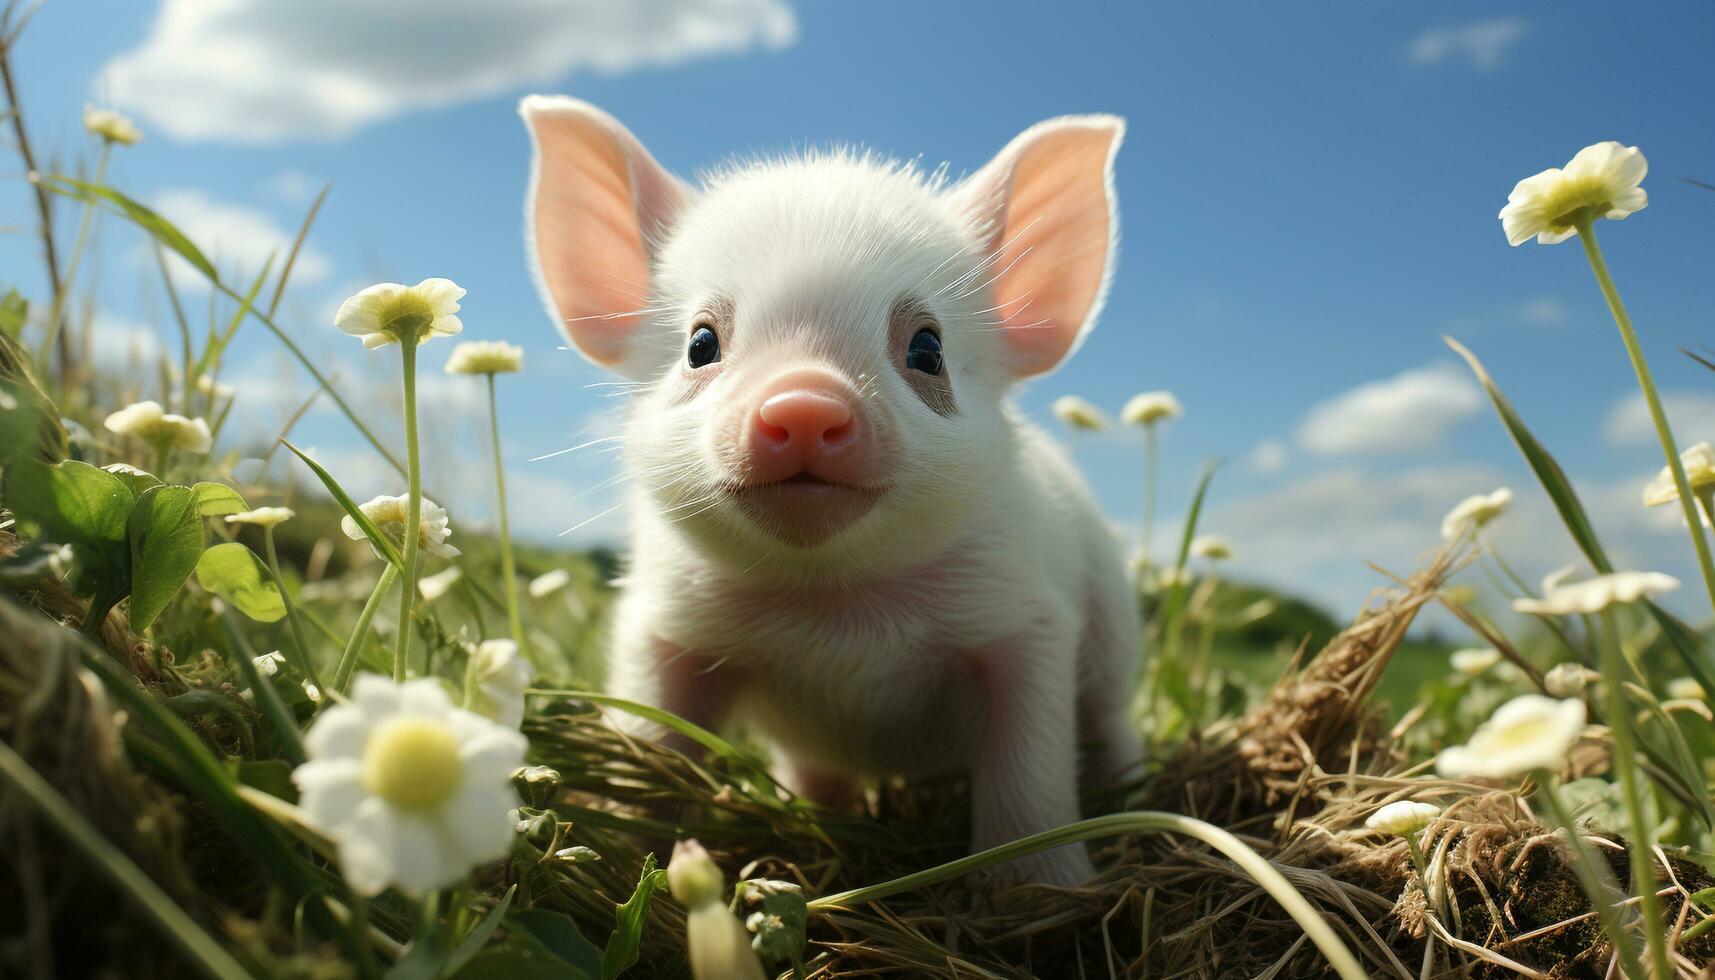 Cute young animals in nature, farm, outdoors, small pets, meadow generated by AI photo